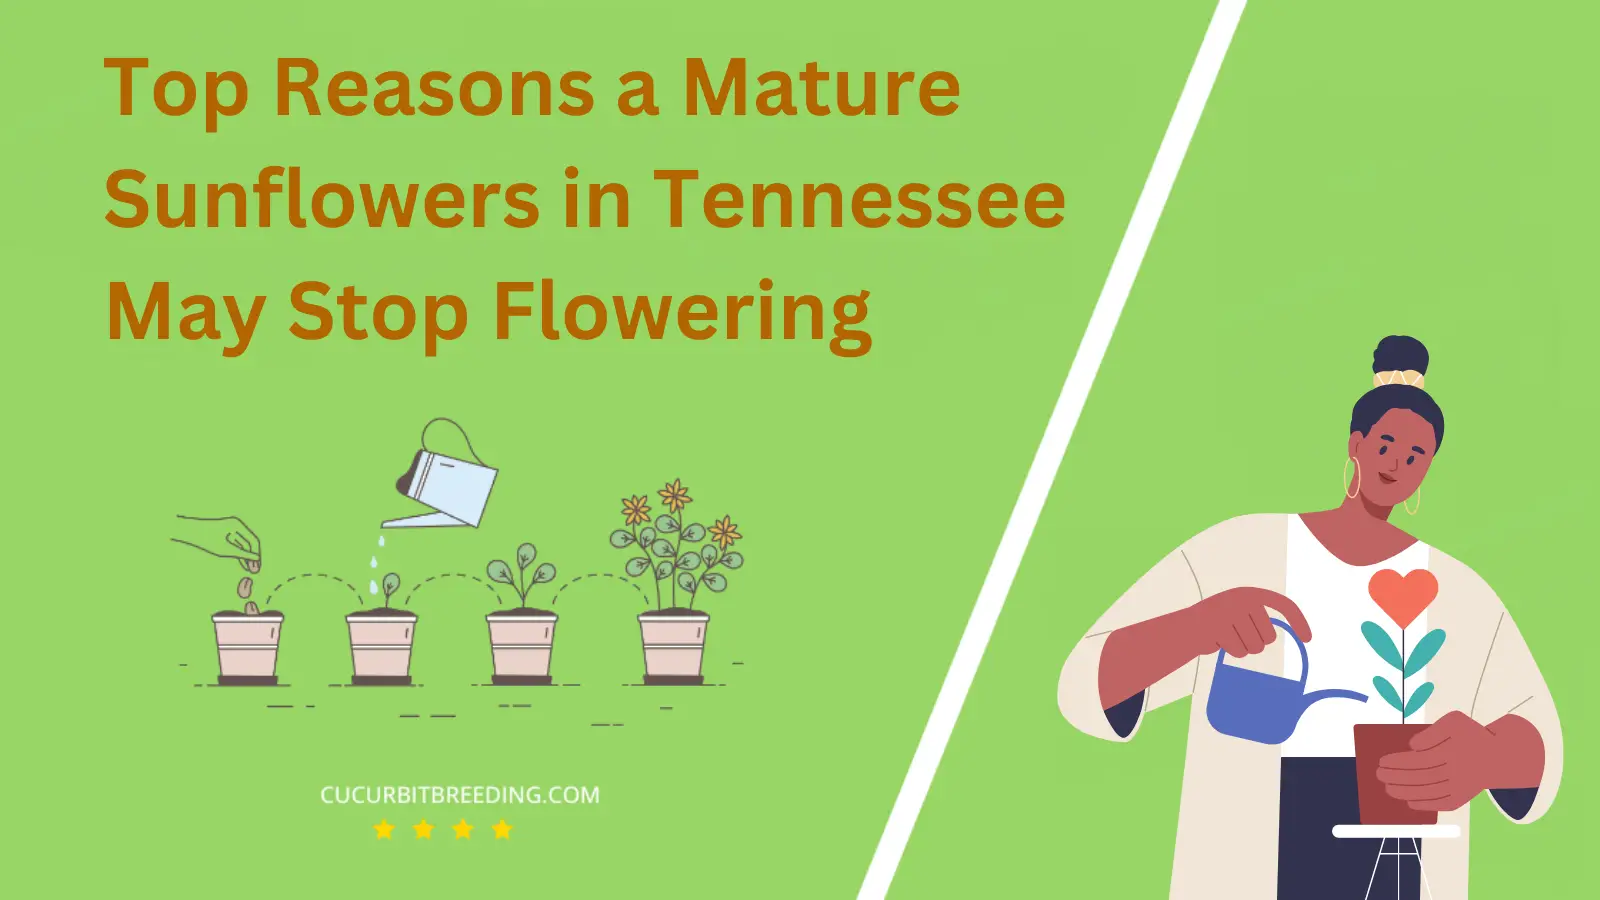 Top Reasons a Mature Sunflowers in Tennessee May Stop Flowering